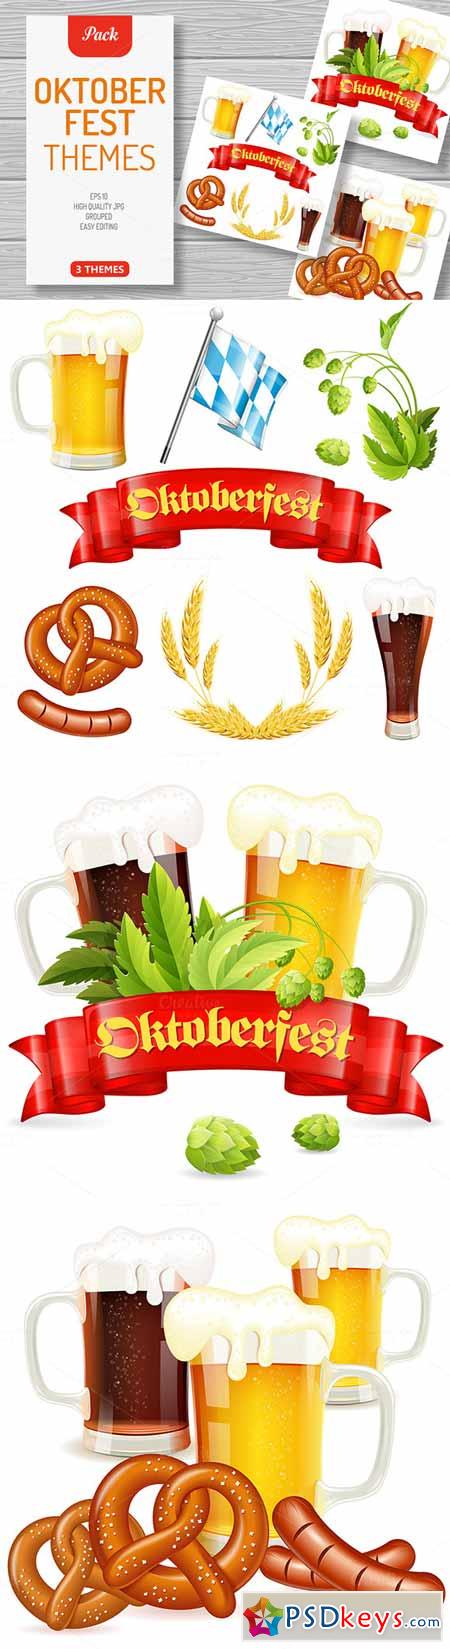 Oktoberfest Posters with Beer 361918